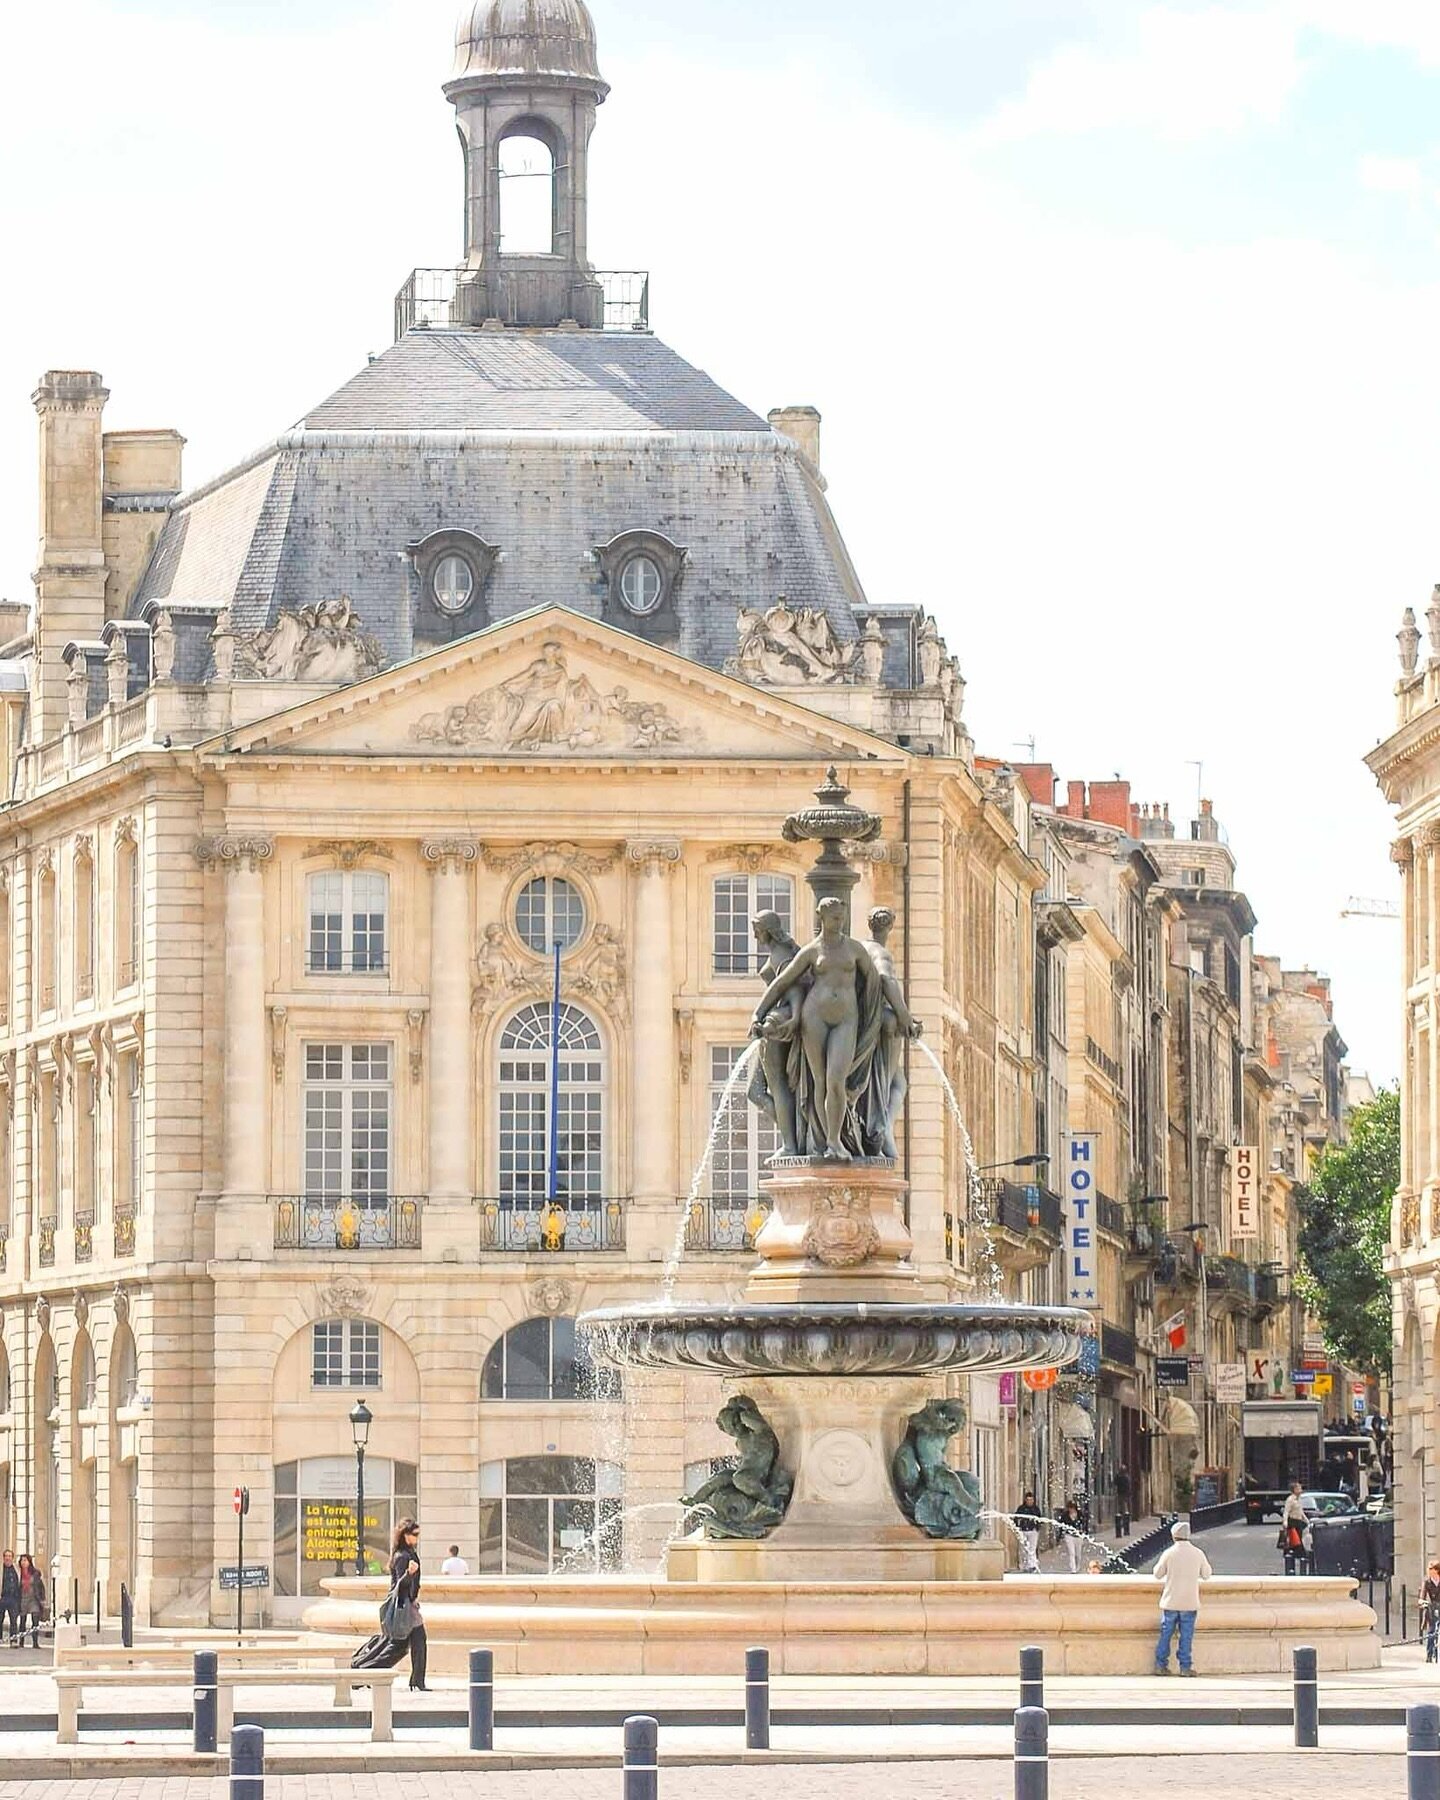 I love the beautiful historic buildings throughout Bordeaux ~ it feels like a mini Paris in some ways except most of the buildings are only about 4-5 stories high. This is one of my favourite buildings and squares ~ the majestic neoclassical &lsquo;P